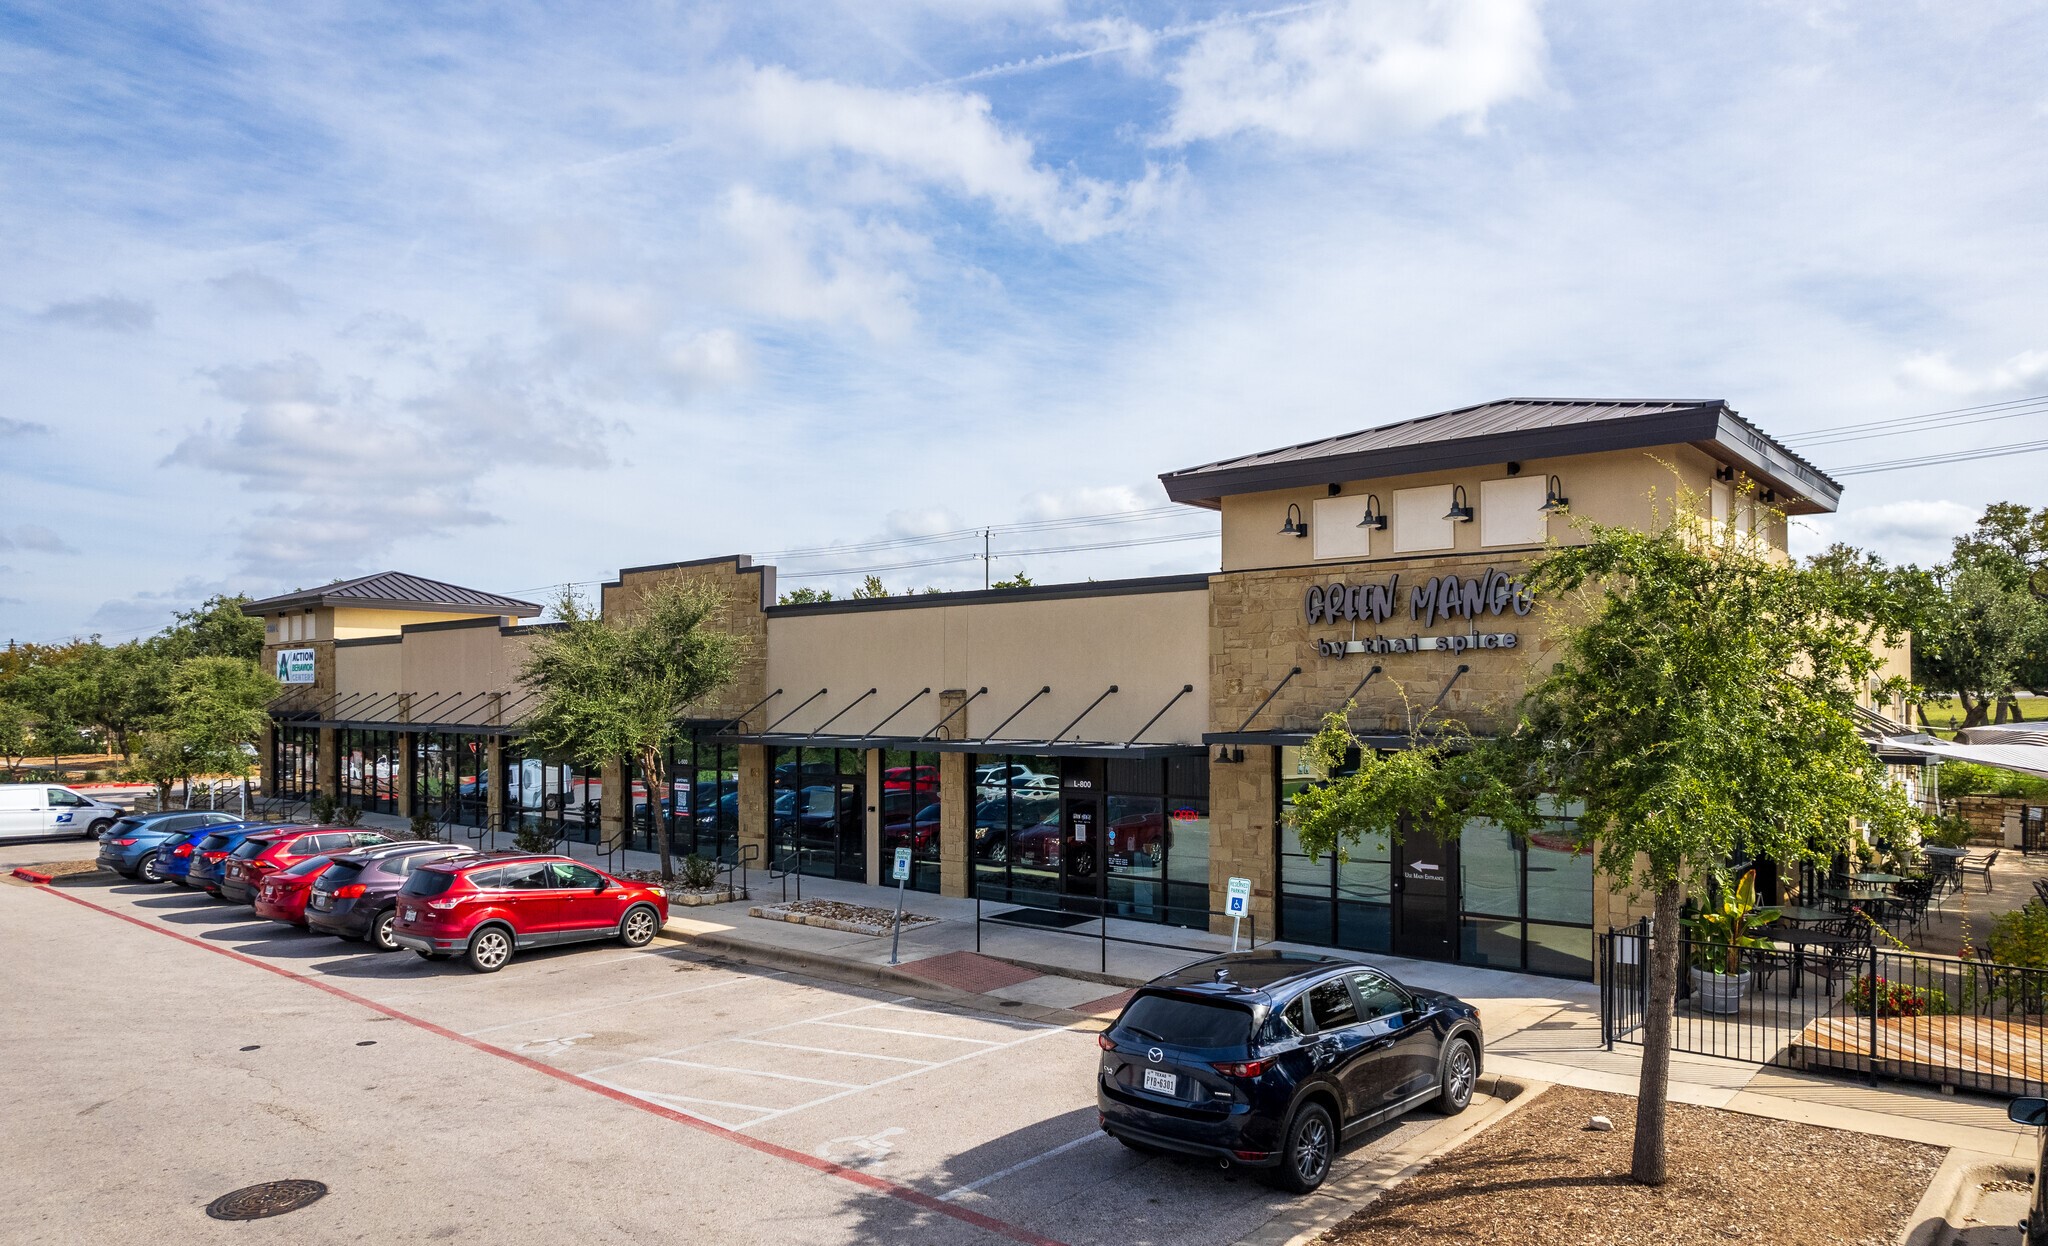 Partners Real Estate arranges lease with frozen yogurt shop, 16 Handles, at Trails at 620 in Austin Partners Real Estate